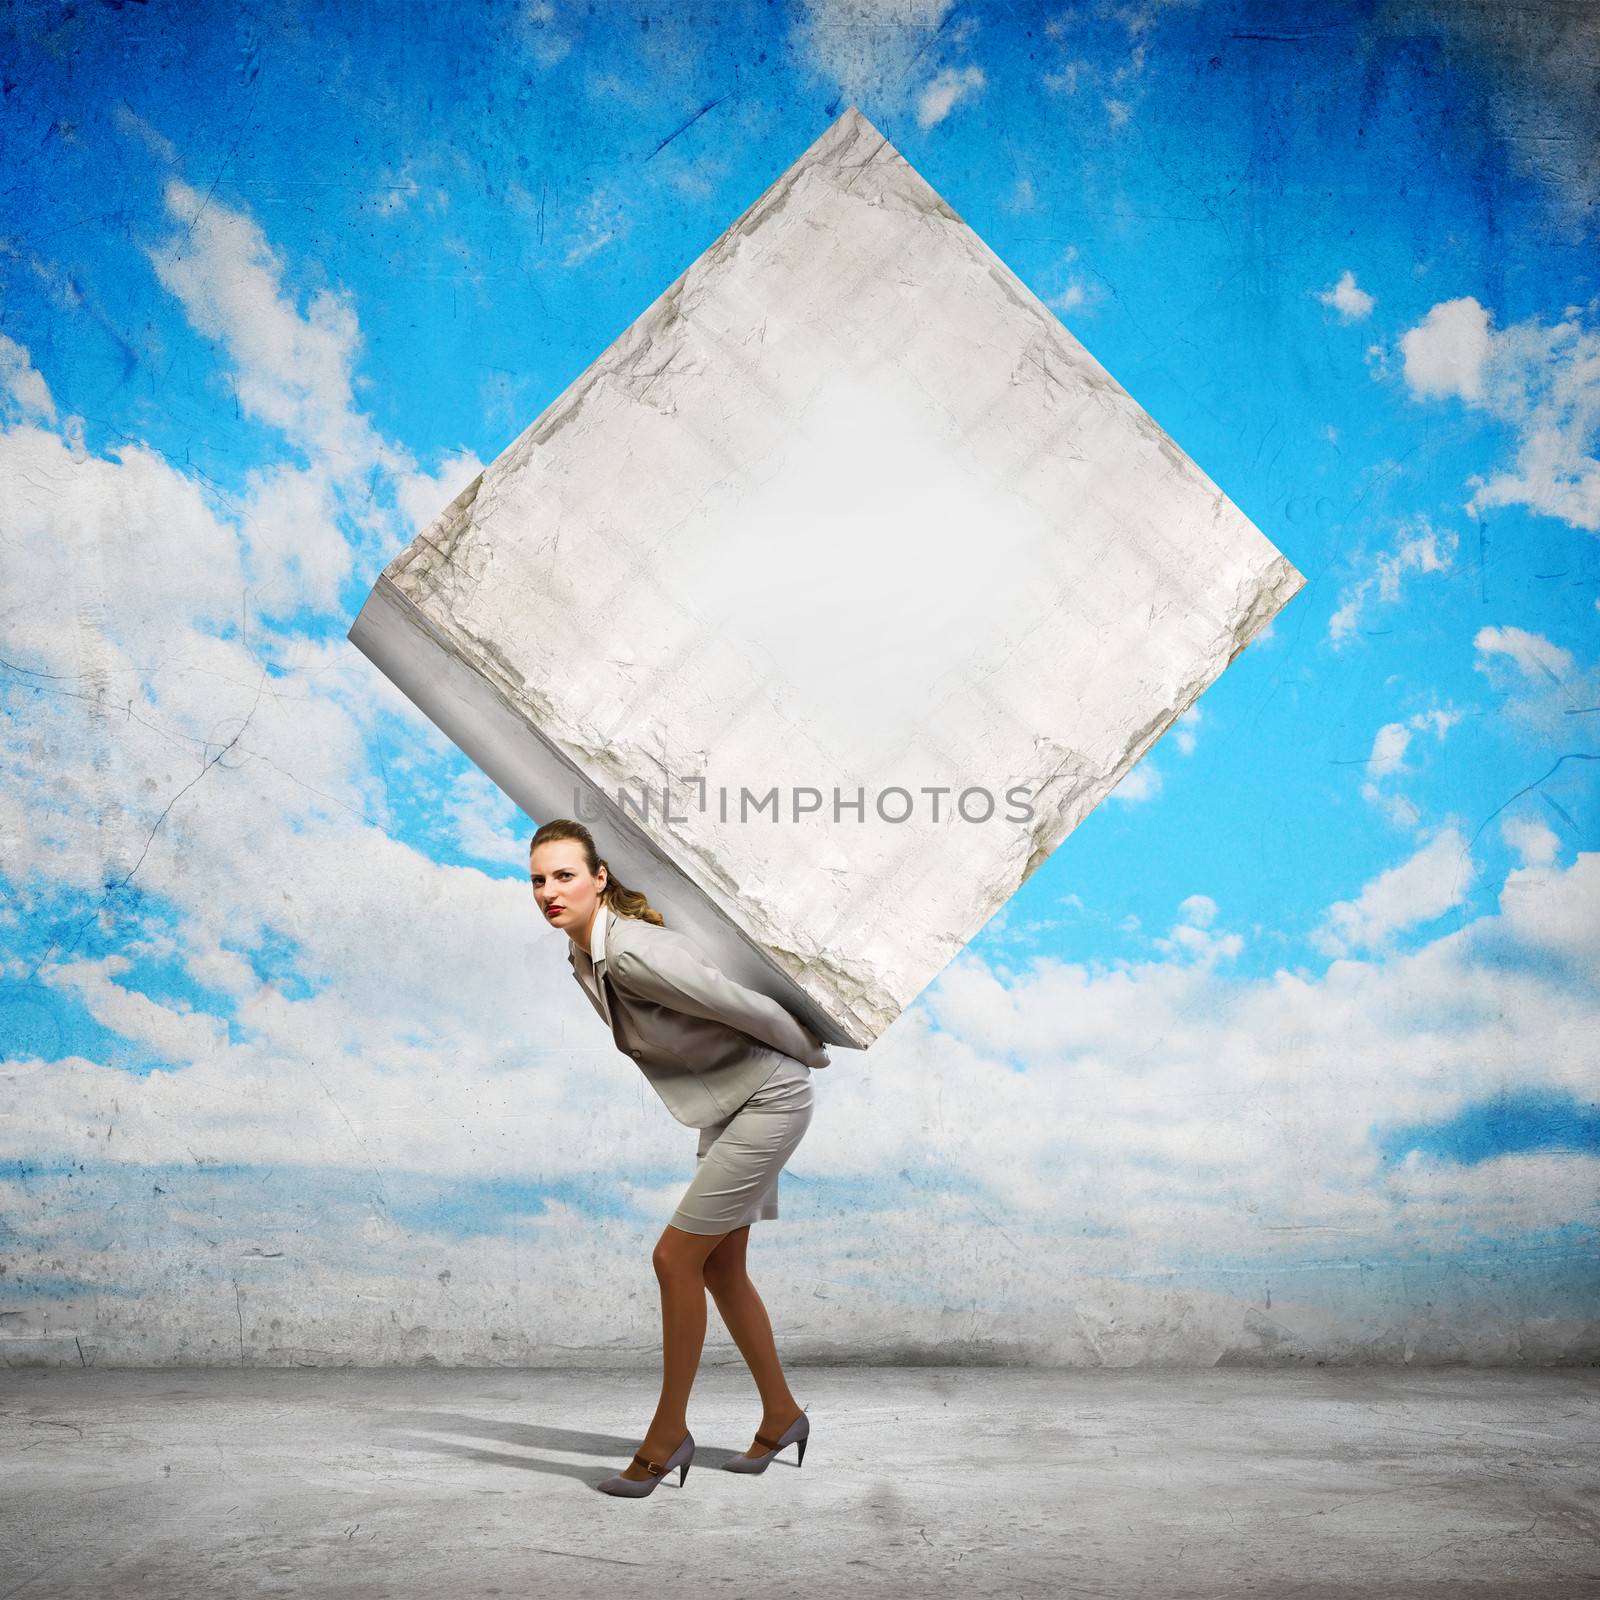 Businesswoman carrying cube by sergey_nivens